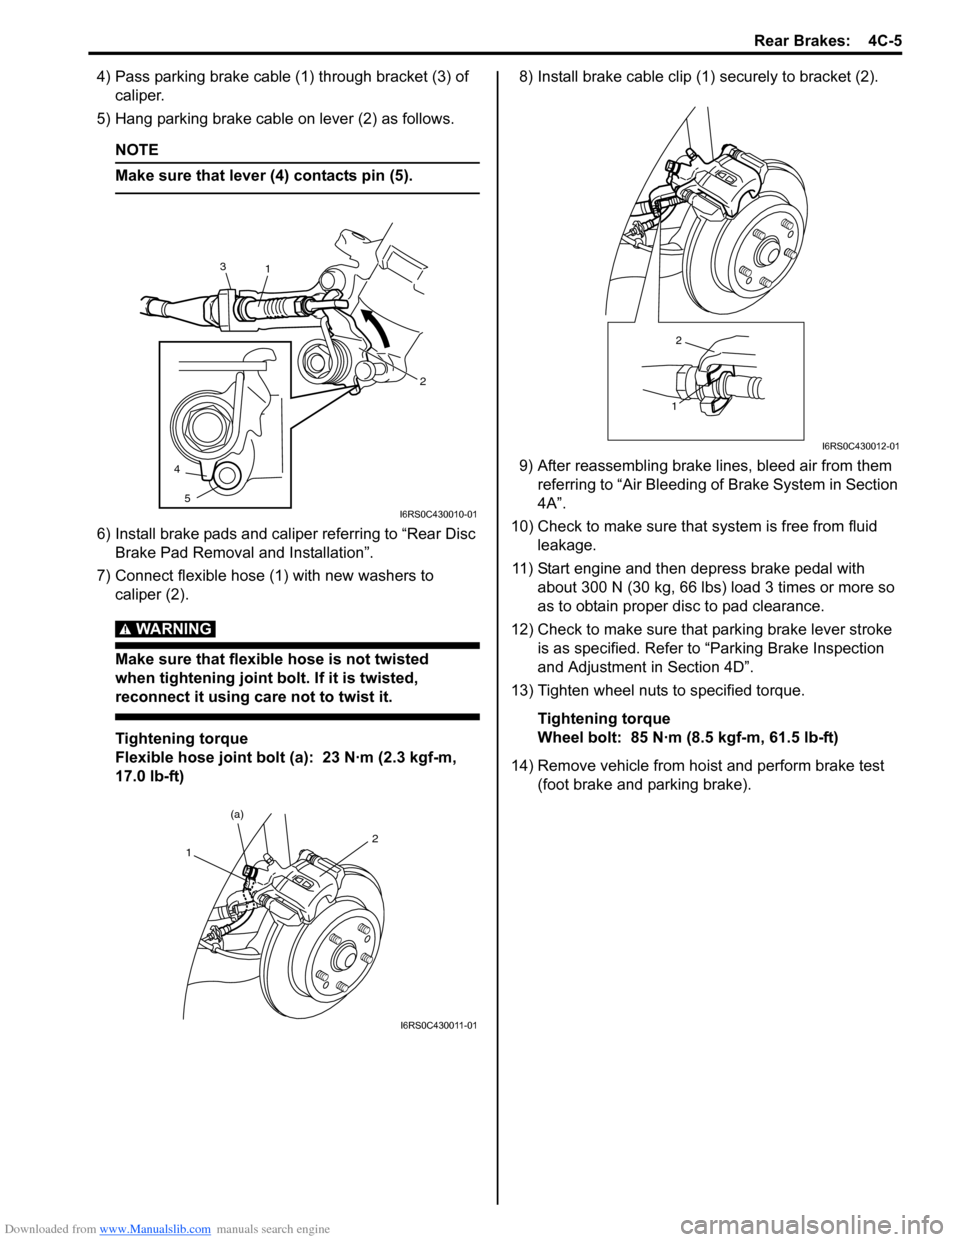 SUZUKI SWIFT 2006 2.G Service Owners Manual Downloaded from www.Manualslib.com manuals search engine Rear Brakes:  4C-5
4) Pass parking brake cable (1) through bracket (3) of caliper.
5) Hang parking brake cable on lever (2) as follows.
NOTE
Ma